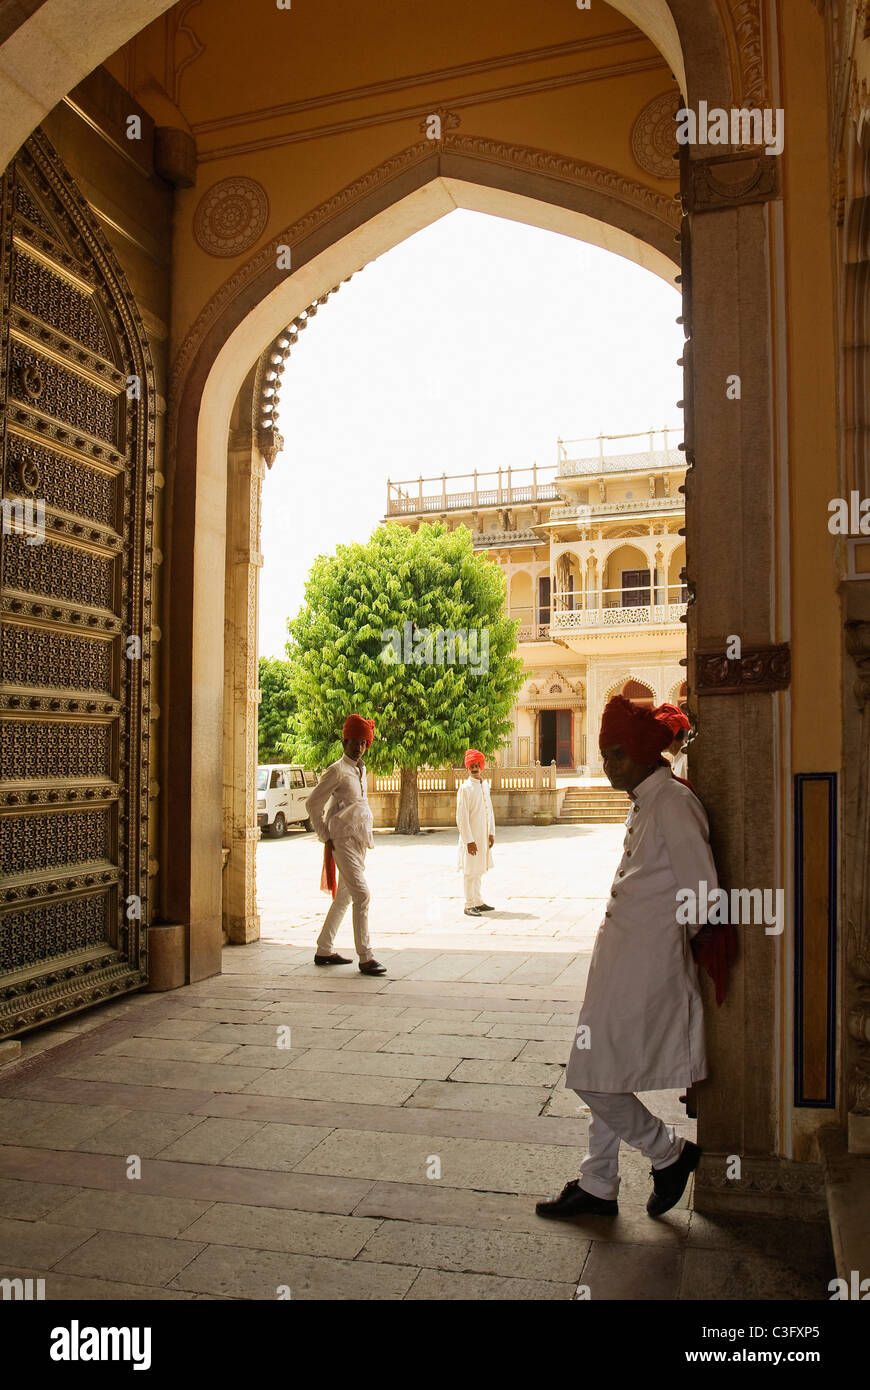 Security guards at the entrance of a palace, City Palace, Jaipur, Rajasthan, India Stock Photo